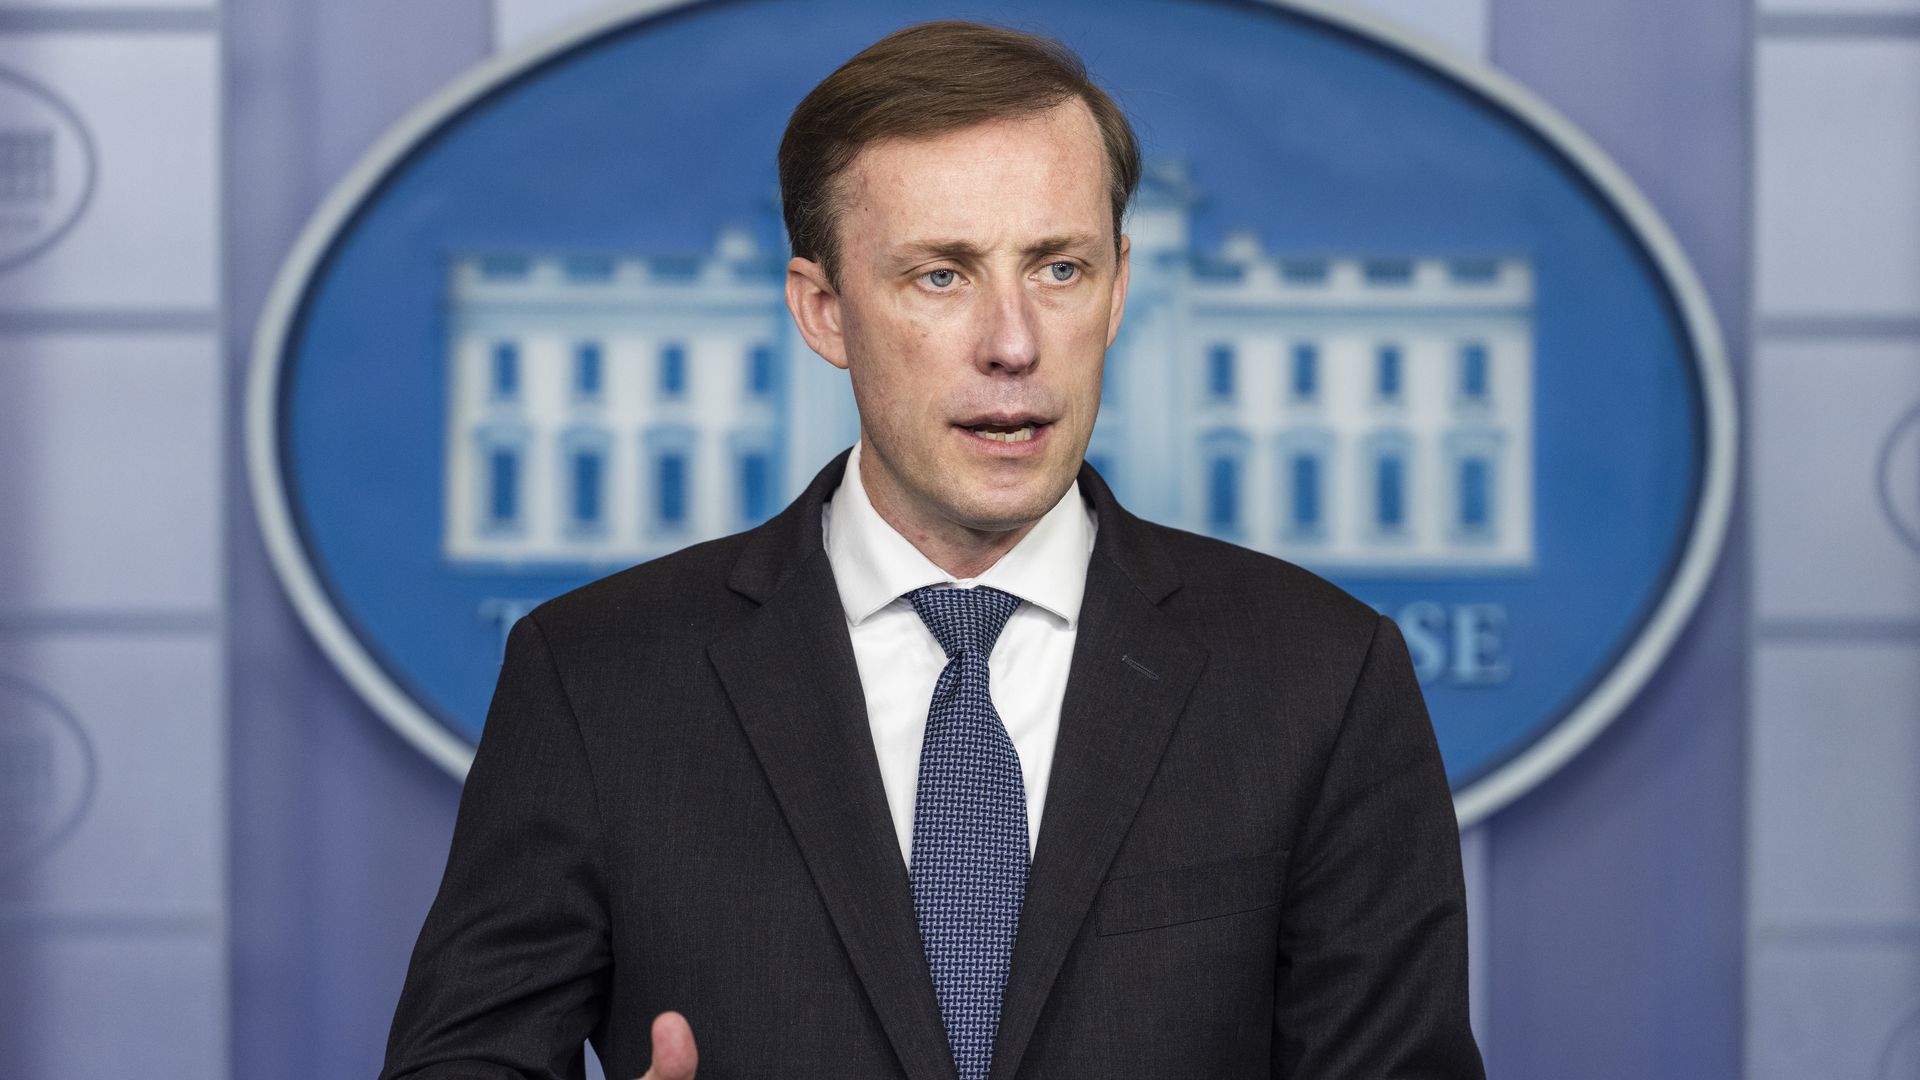 National Security Adviser Jake Sullivan is seen speaking at the White House.